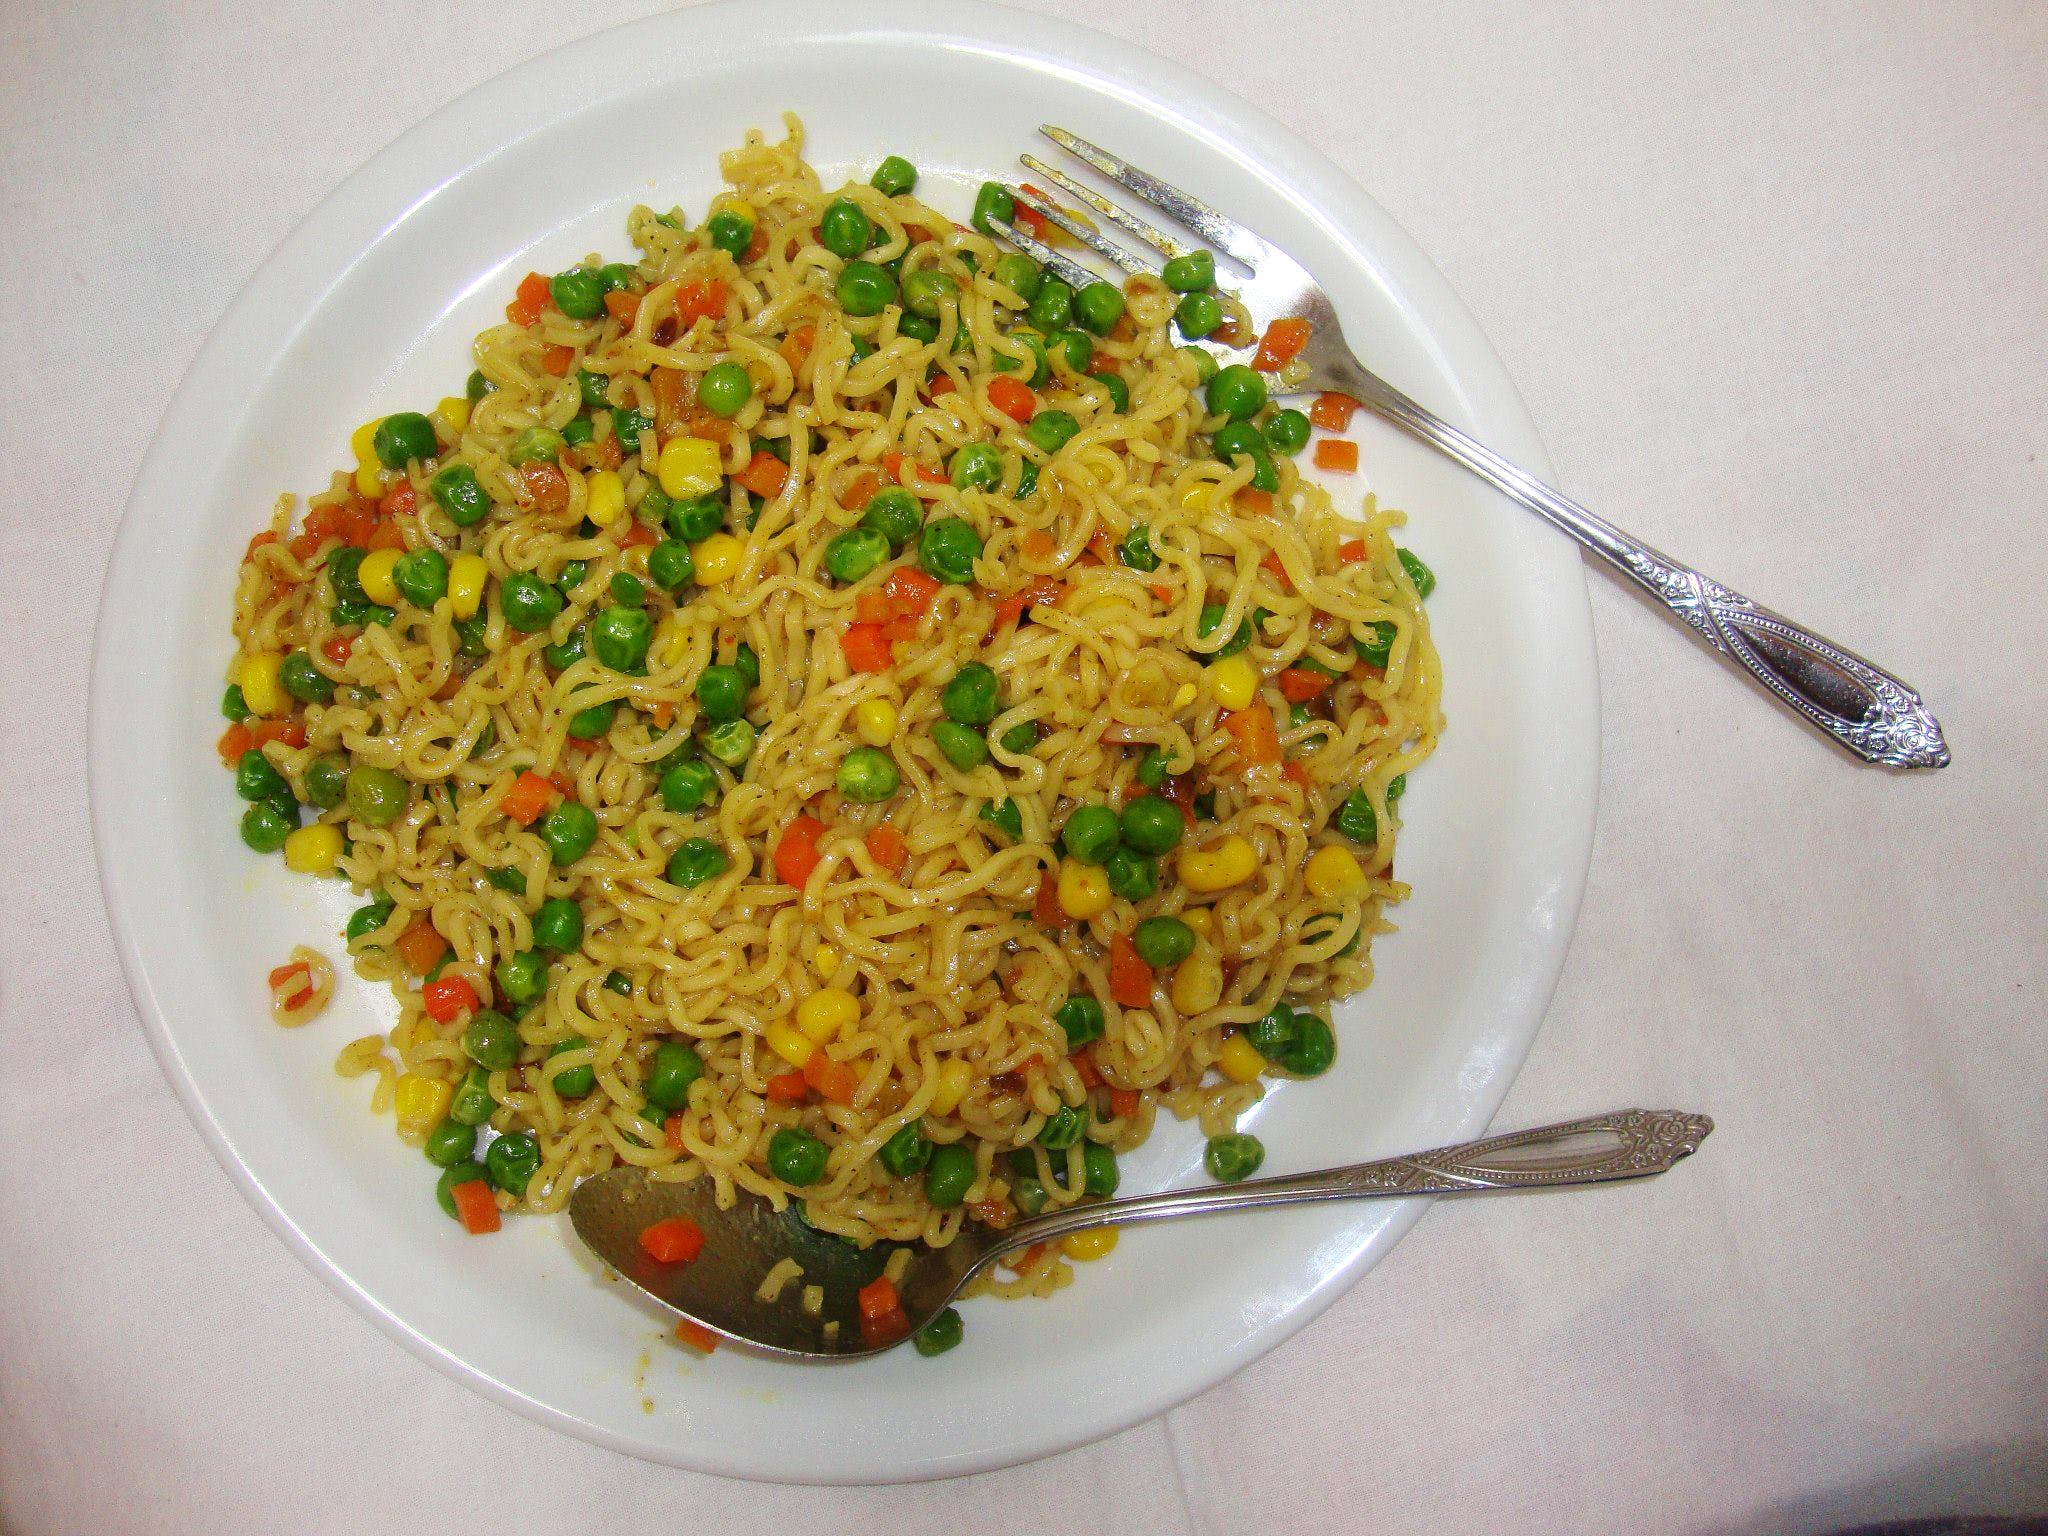 Cuisine,Food,Dish,Yeung chow fried rice,Ingredient,Fried rice,Rice noodles,Pilaf,Indian cuisine,Indian chinese cuisine